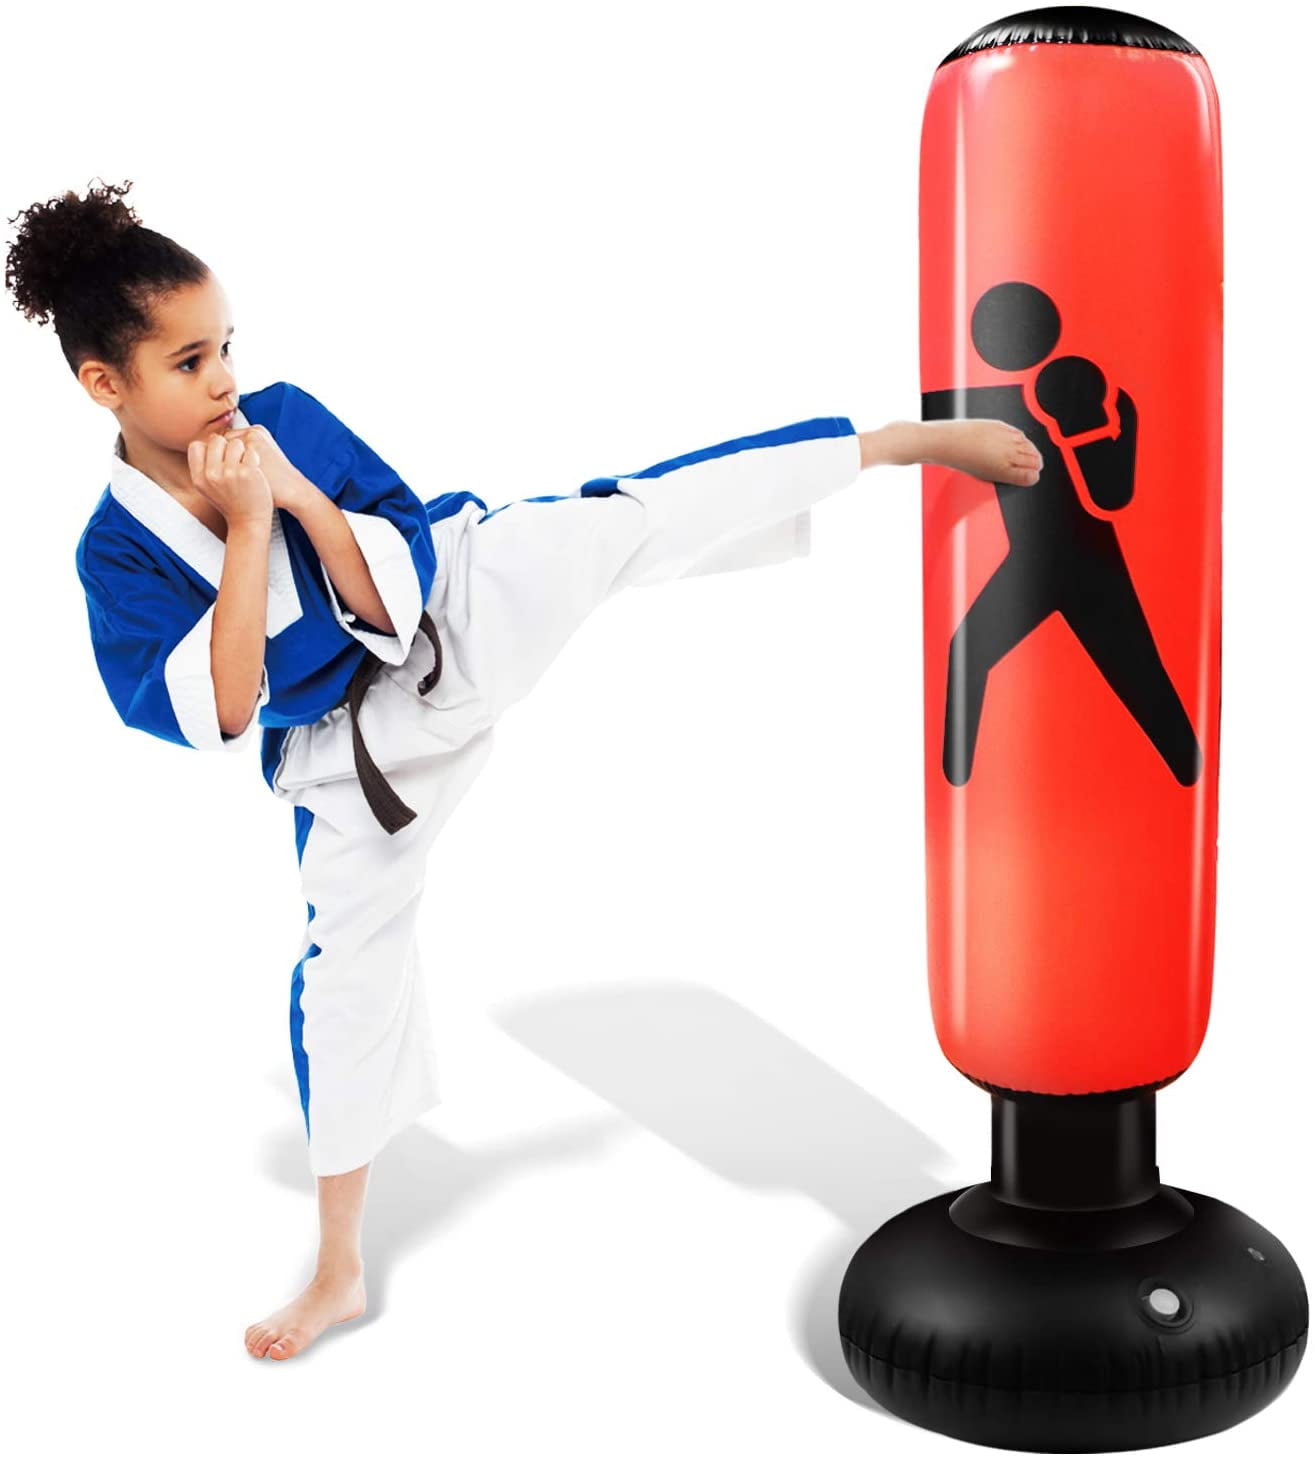 150/160cm Free Standing Inflatable Boxing Punch Bag Kick MMA Training Kids Adult 